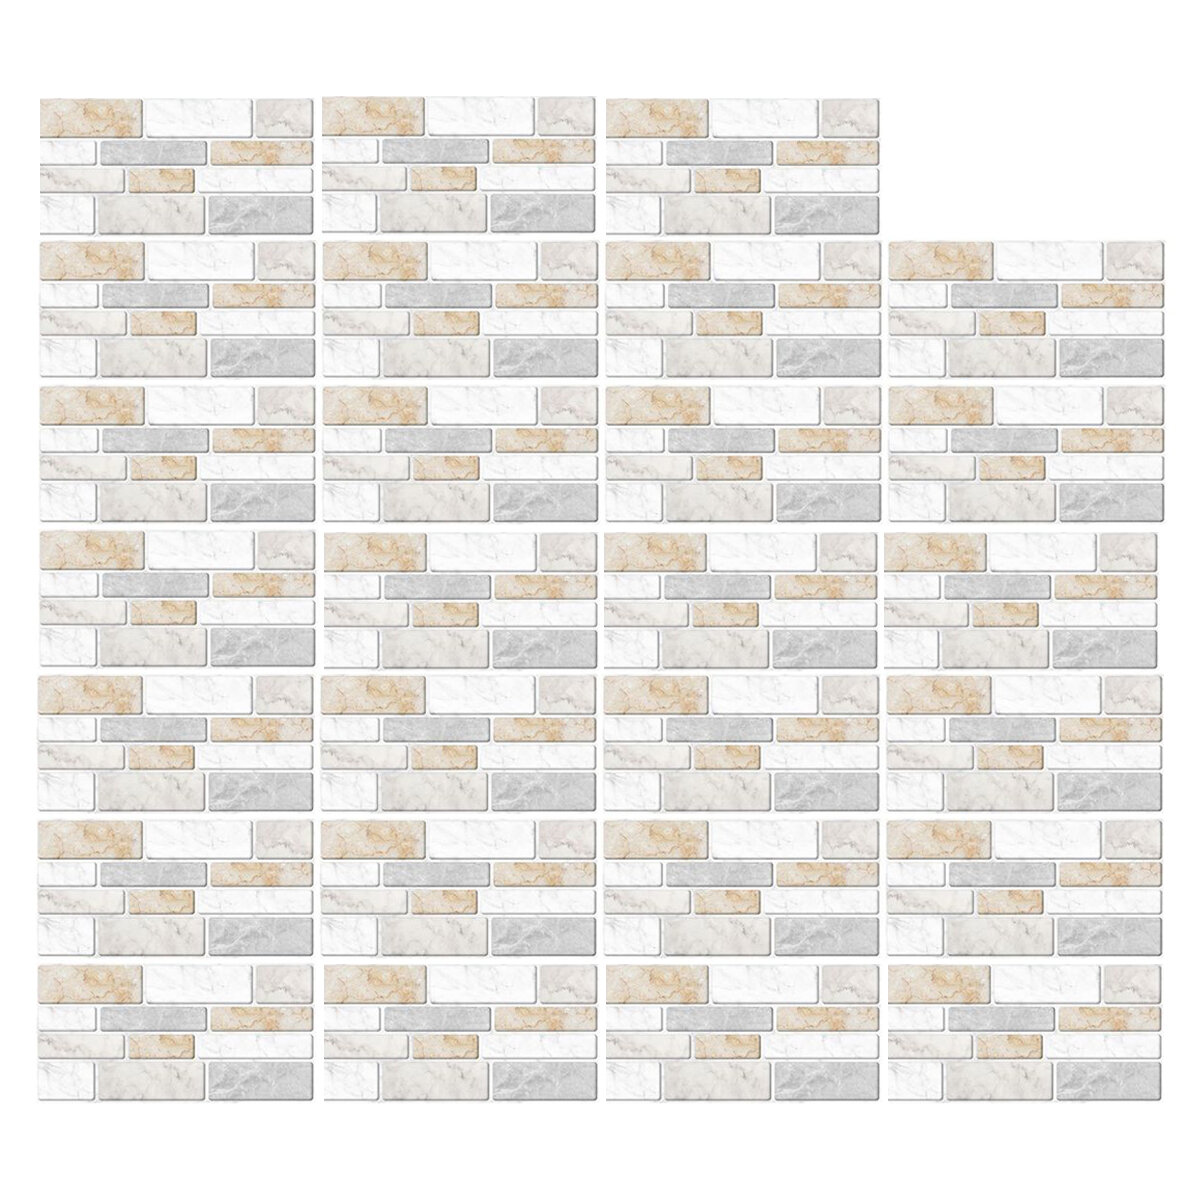 9/27/54pcs Warm Marble Tile Wall Stickers Self-adhesive Wall Paper DIY Home Decor